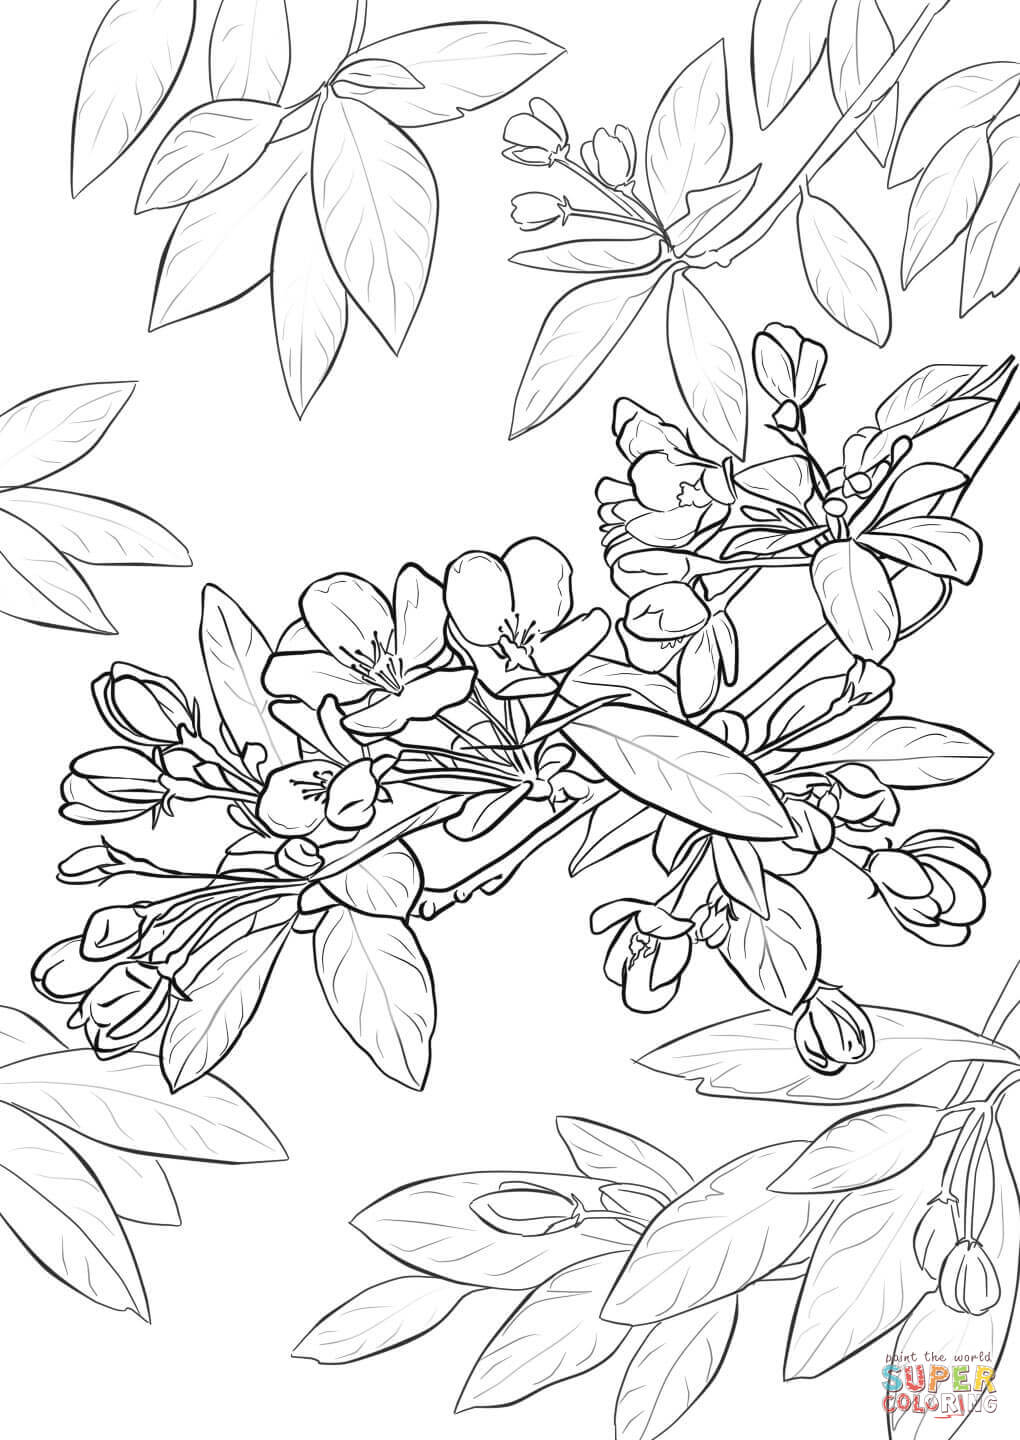 Apple Blossom coloring #18, Download drawings